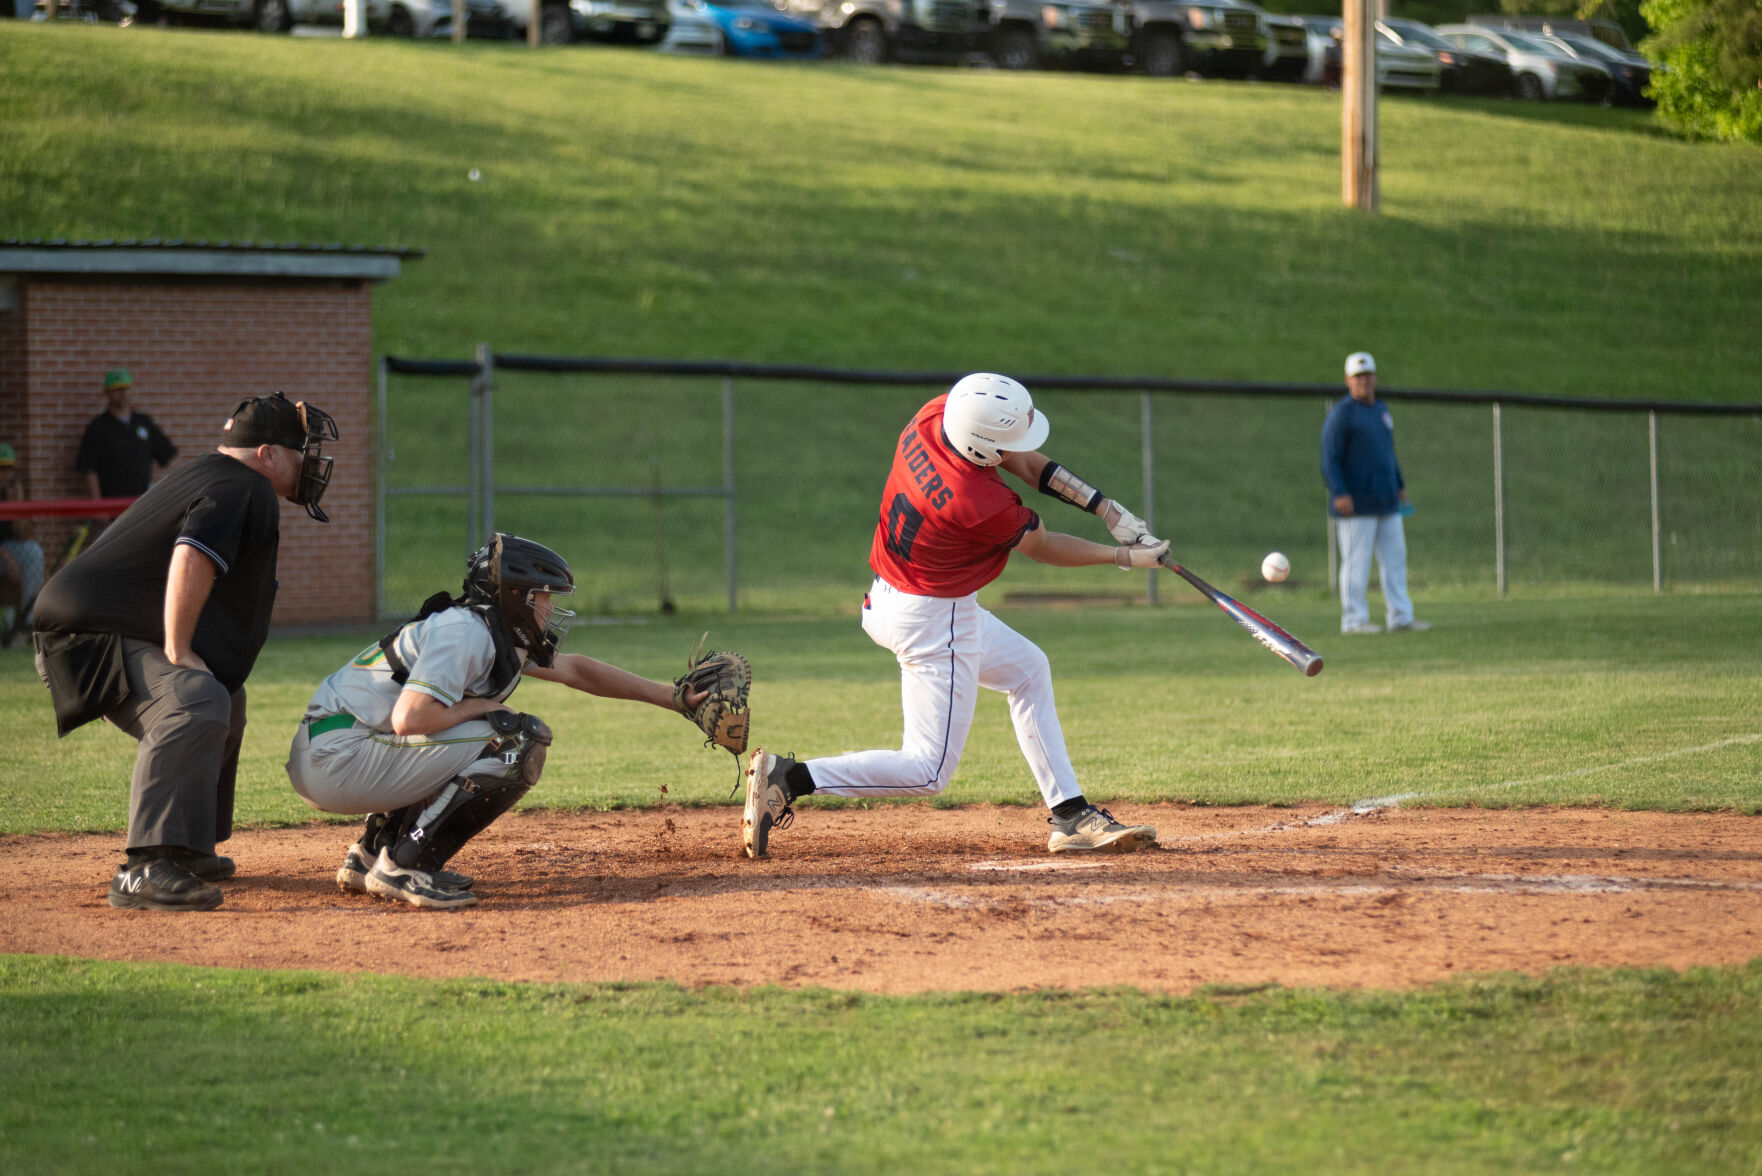 (Big) show-stopper: Hall hits two homers, collects six RBIs in Raiders’ win over Greenup